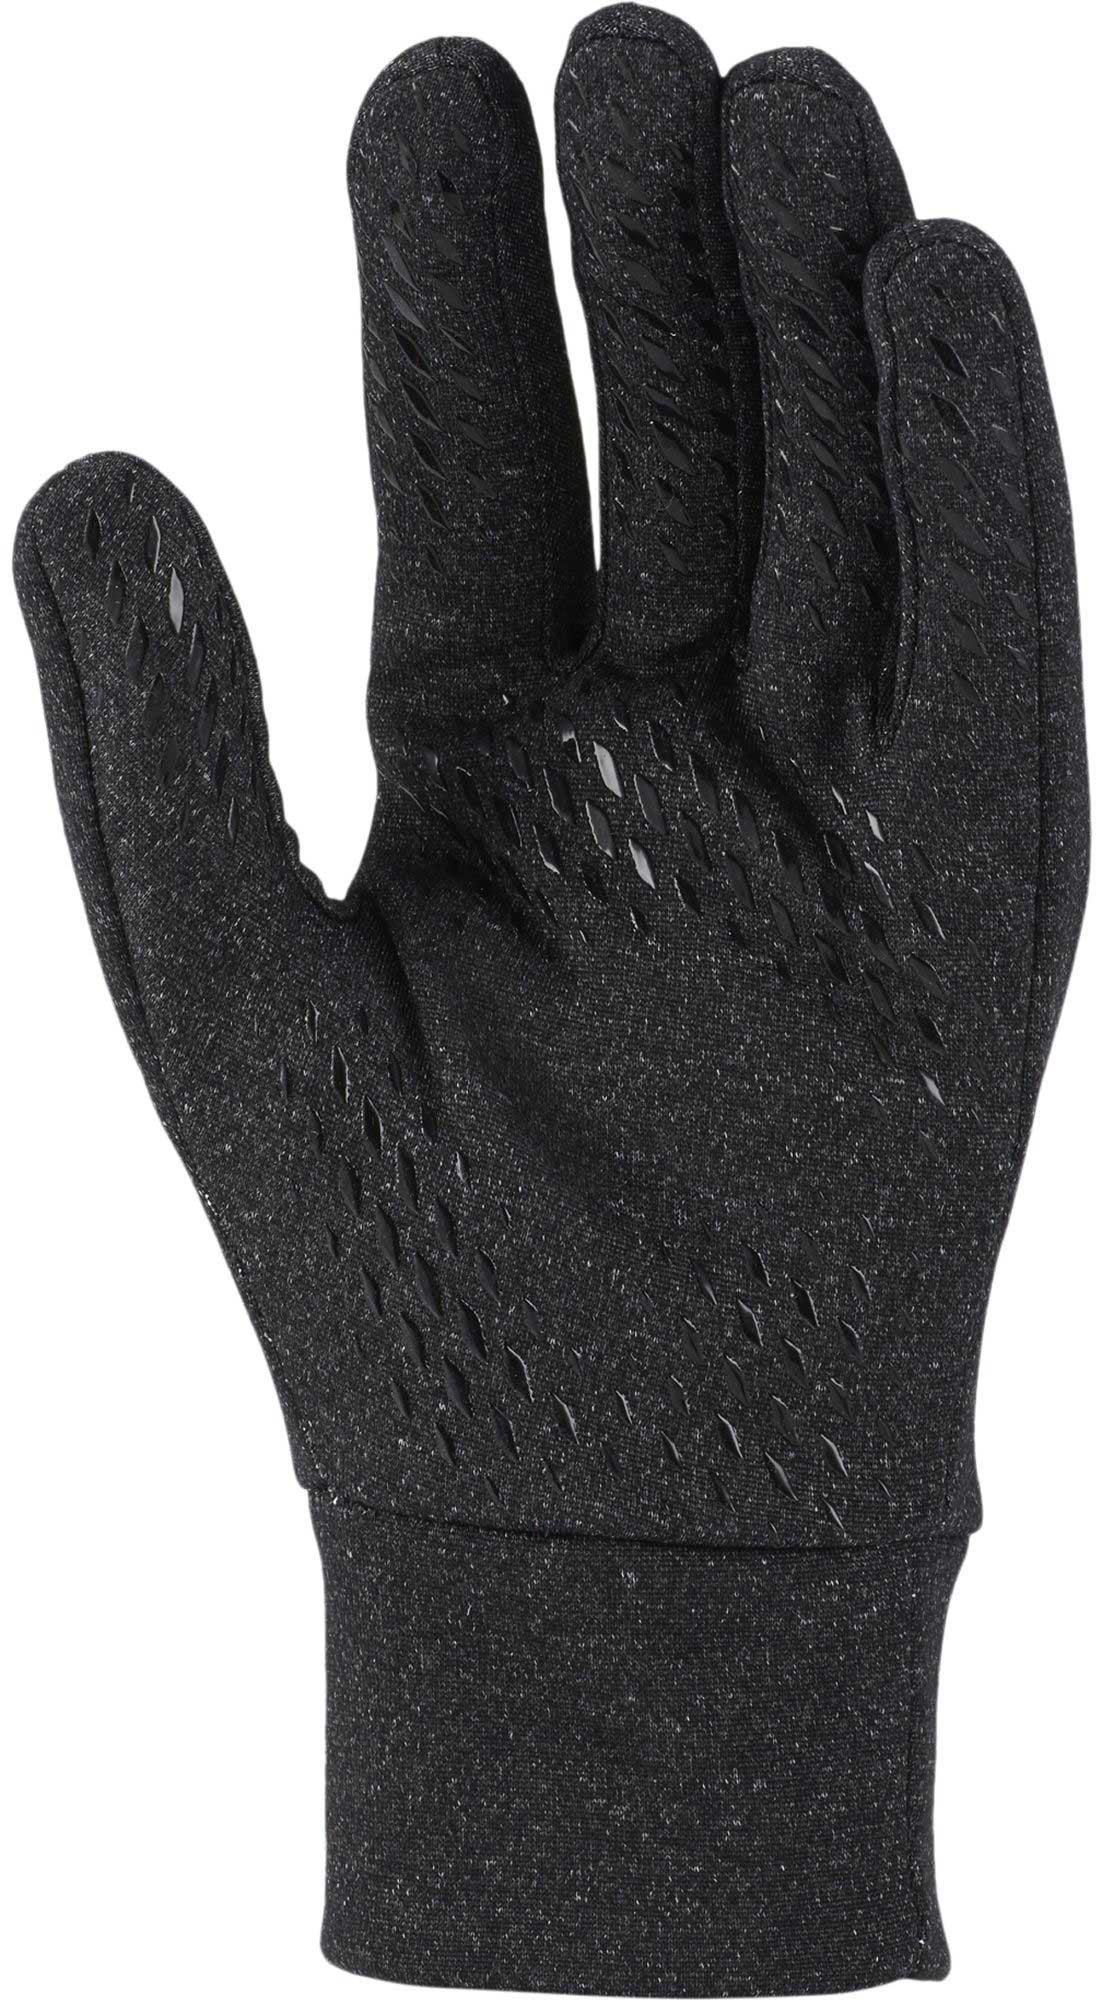 Men's players gloves